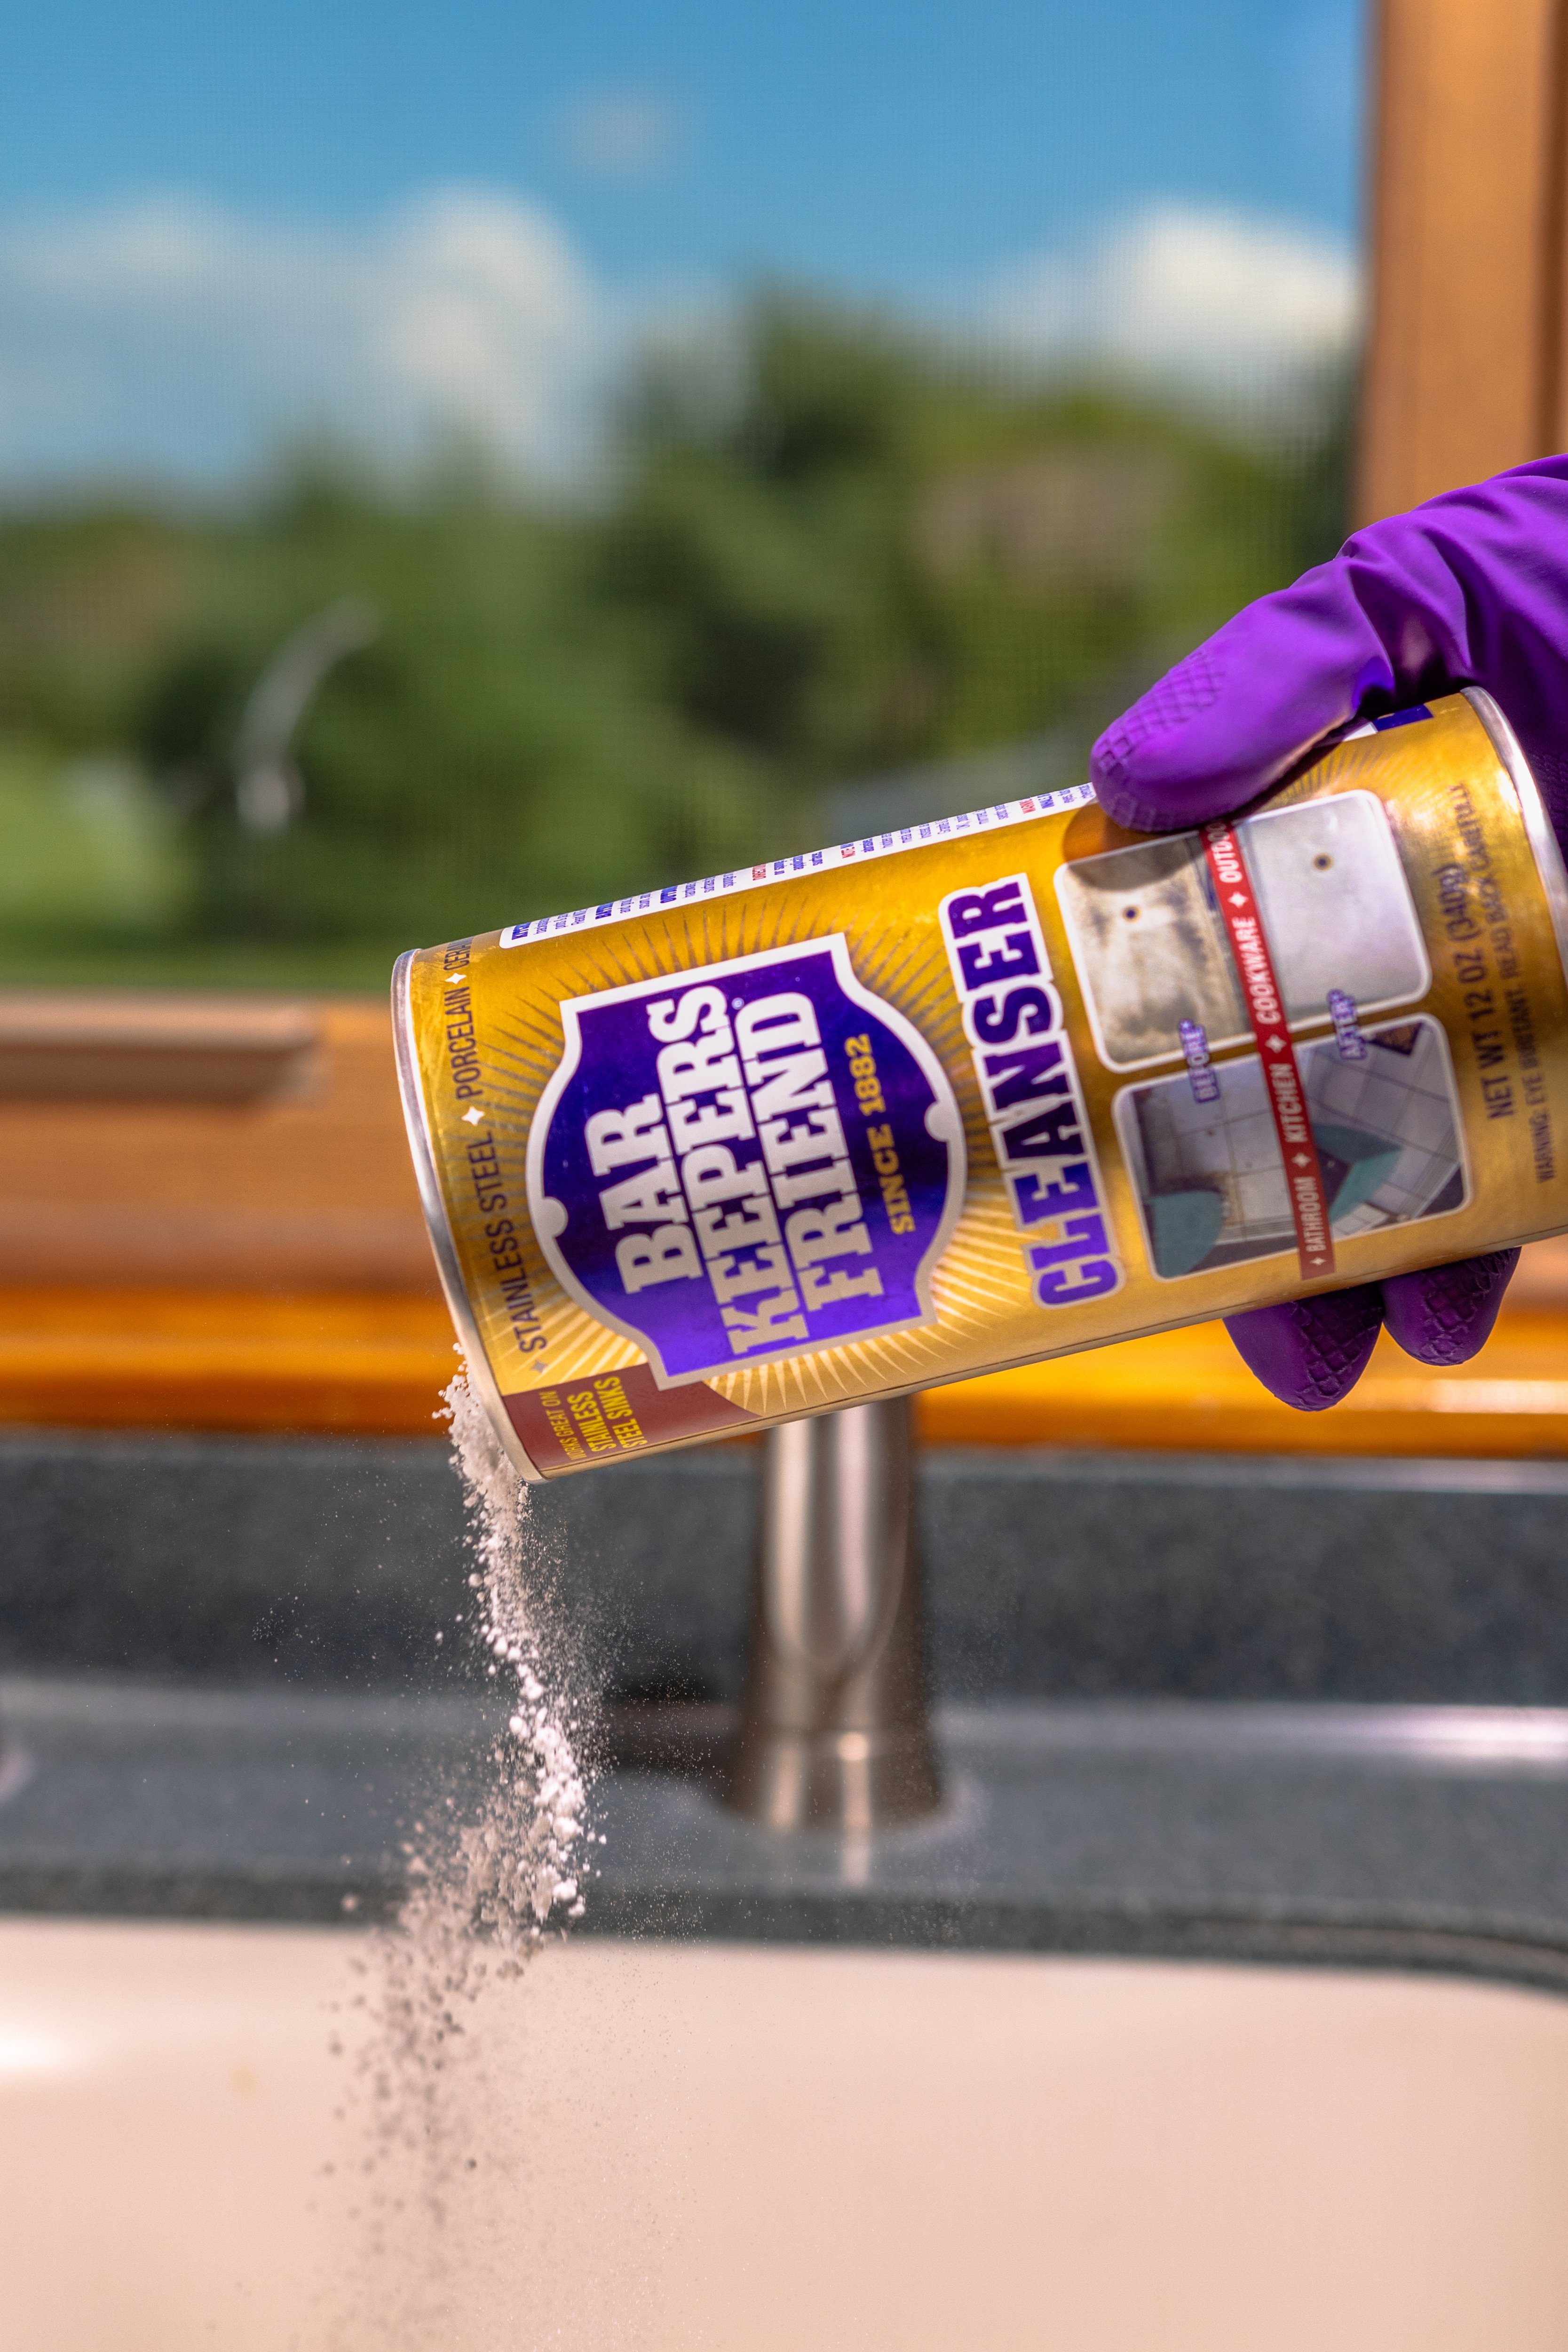 Bar Keepers Friend Cleanser - Shop All Purpose Cleaners at H-E-B